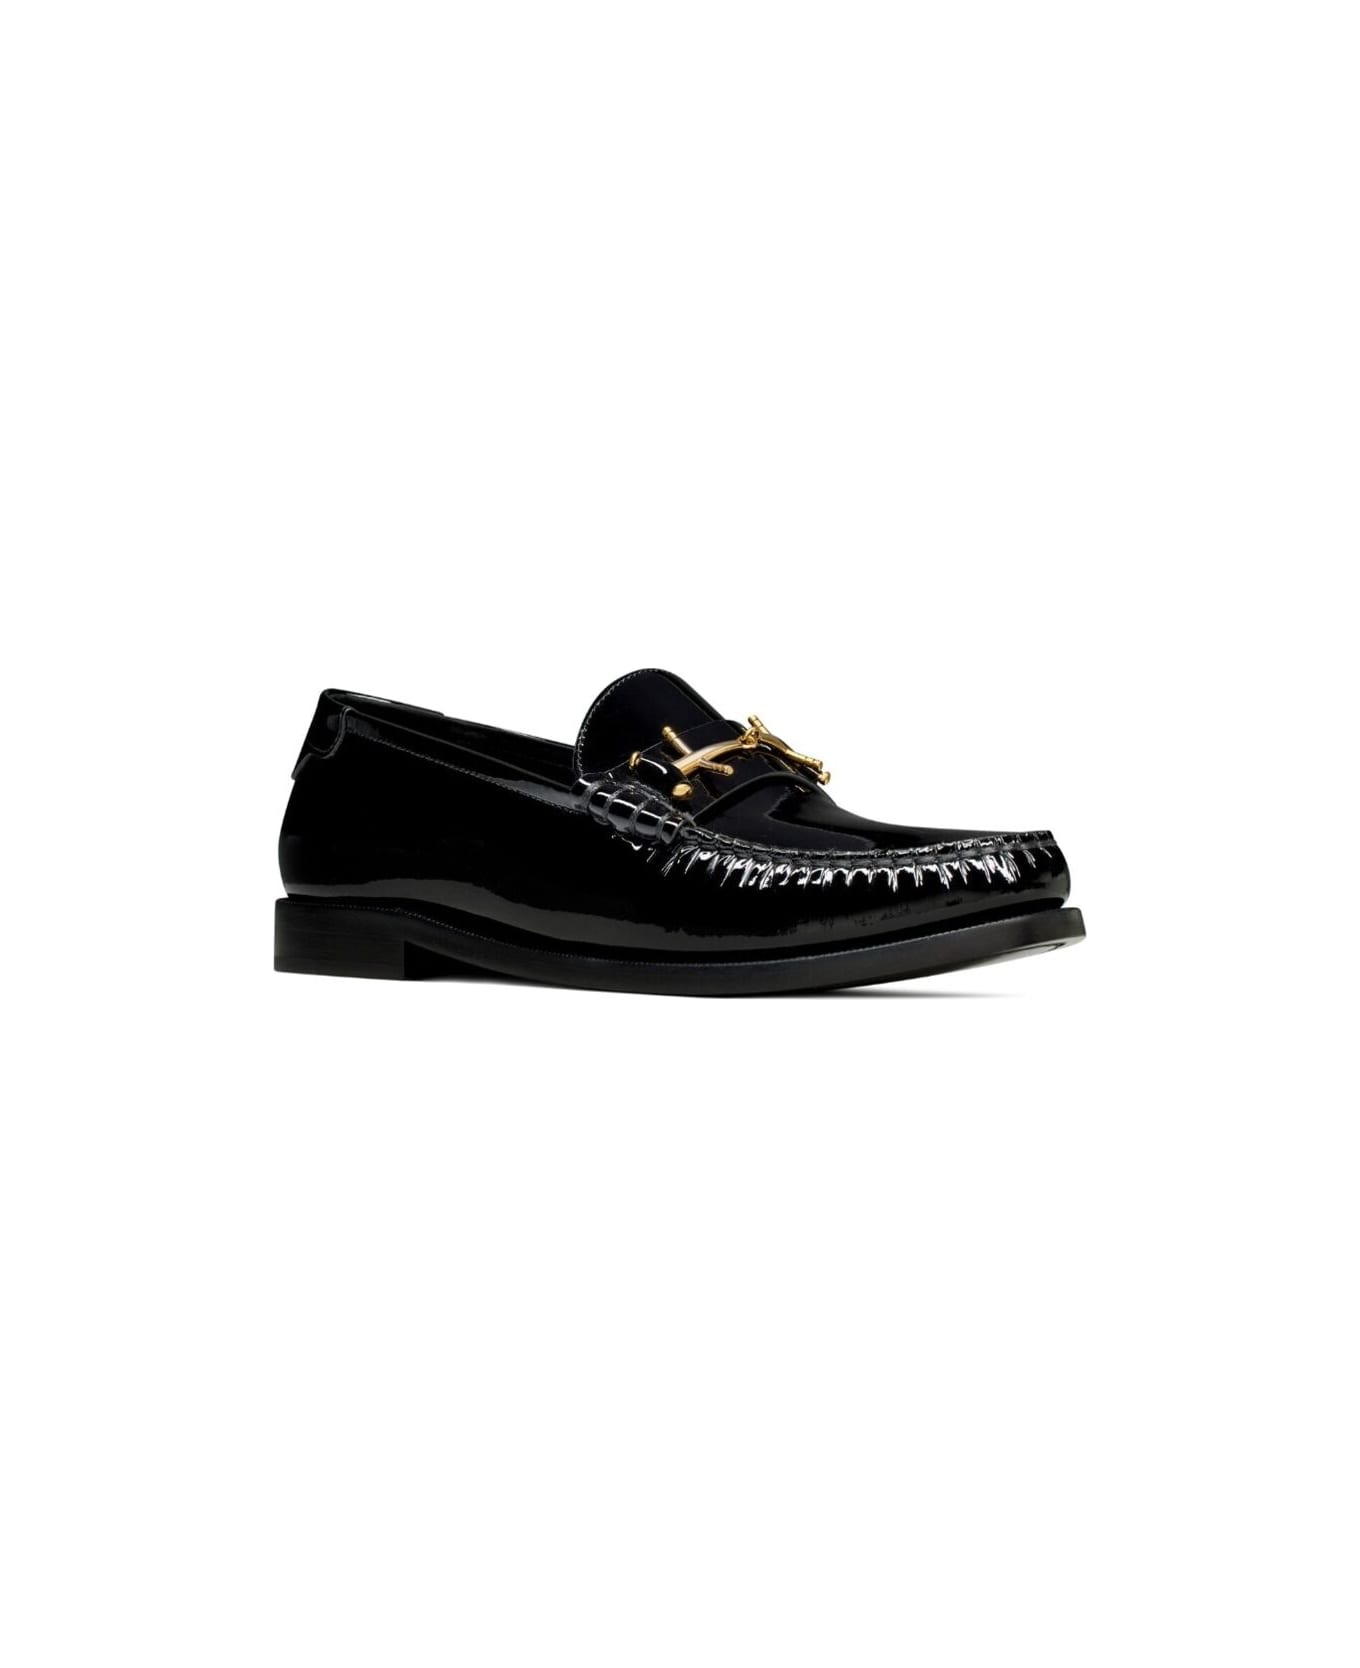 Saint Laurent Le Loafer Penny Slippers In Black Patent Leather Woman - Black フラットシューズ